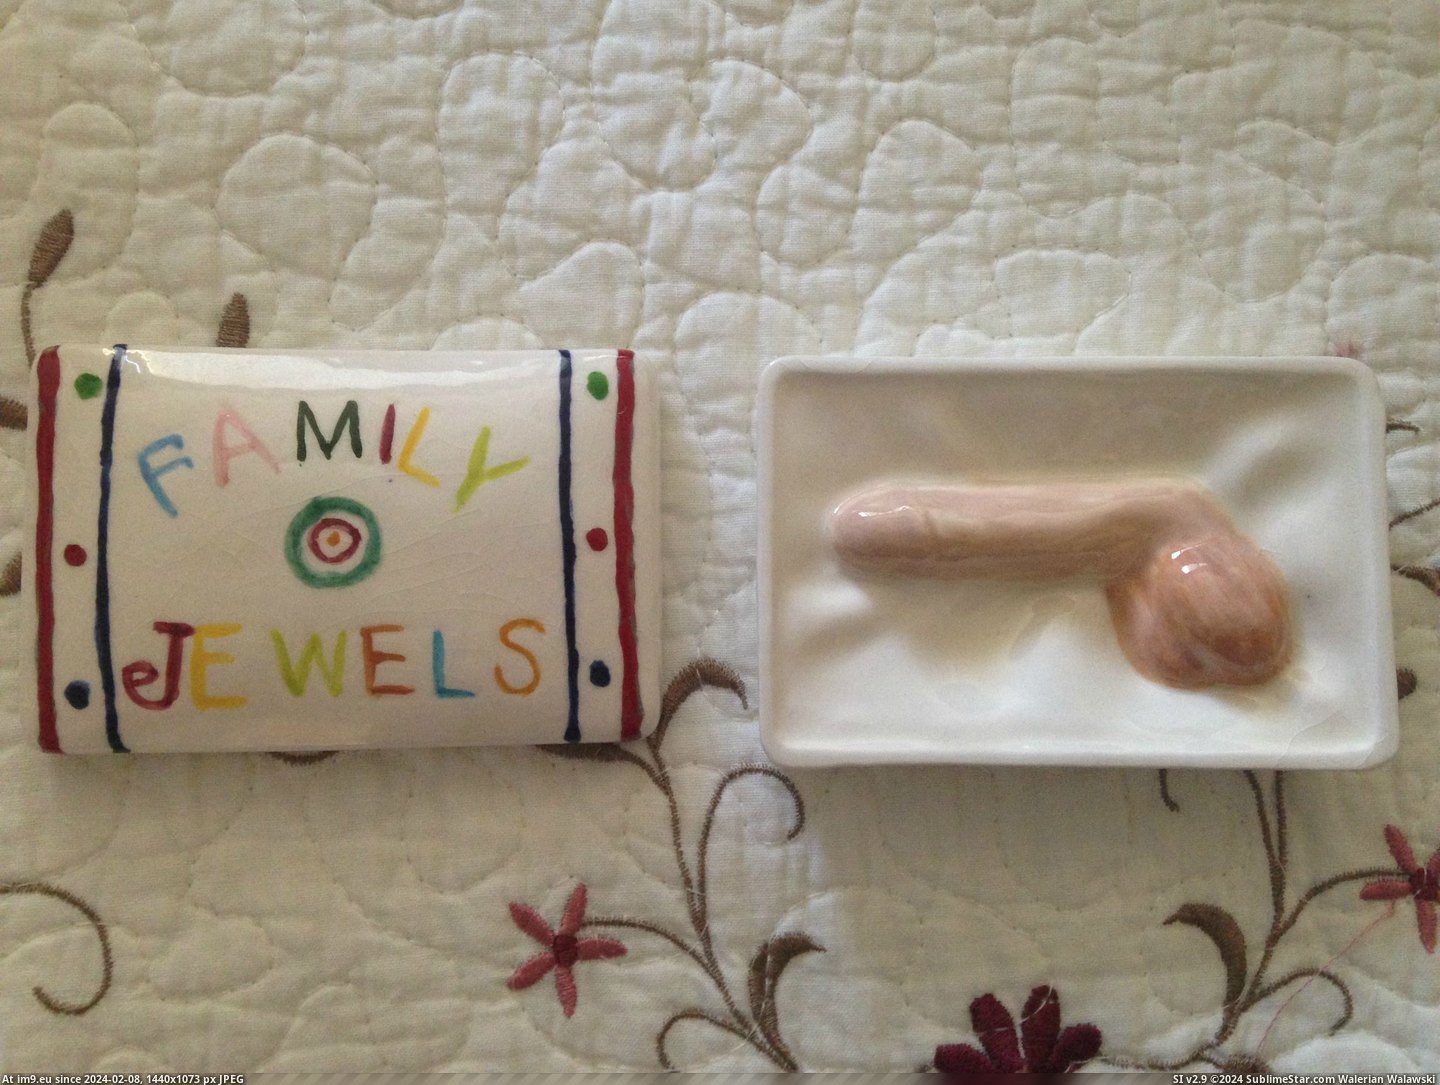 #Wtf #Art #Great #Out #Penis #Gave #Grandmother #Gifts #Got #She #Family #Boyfriend [Wtf] My Great-Grandmother got a boyfriend...so she made this penis art and gave it out as gifts to the family. [NSFW] 1 Pic. (Bild von album My r/WTF favs))